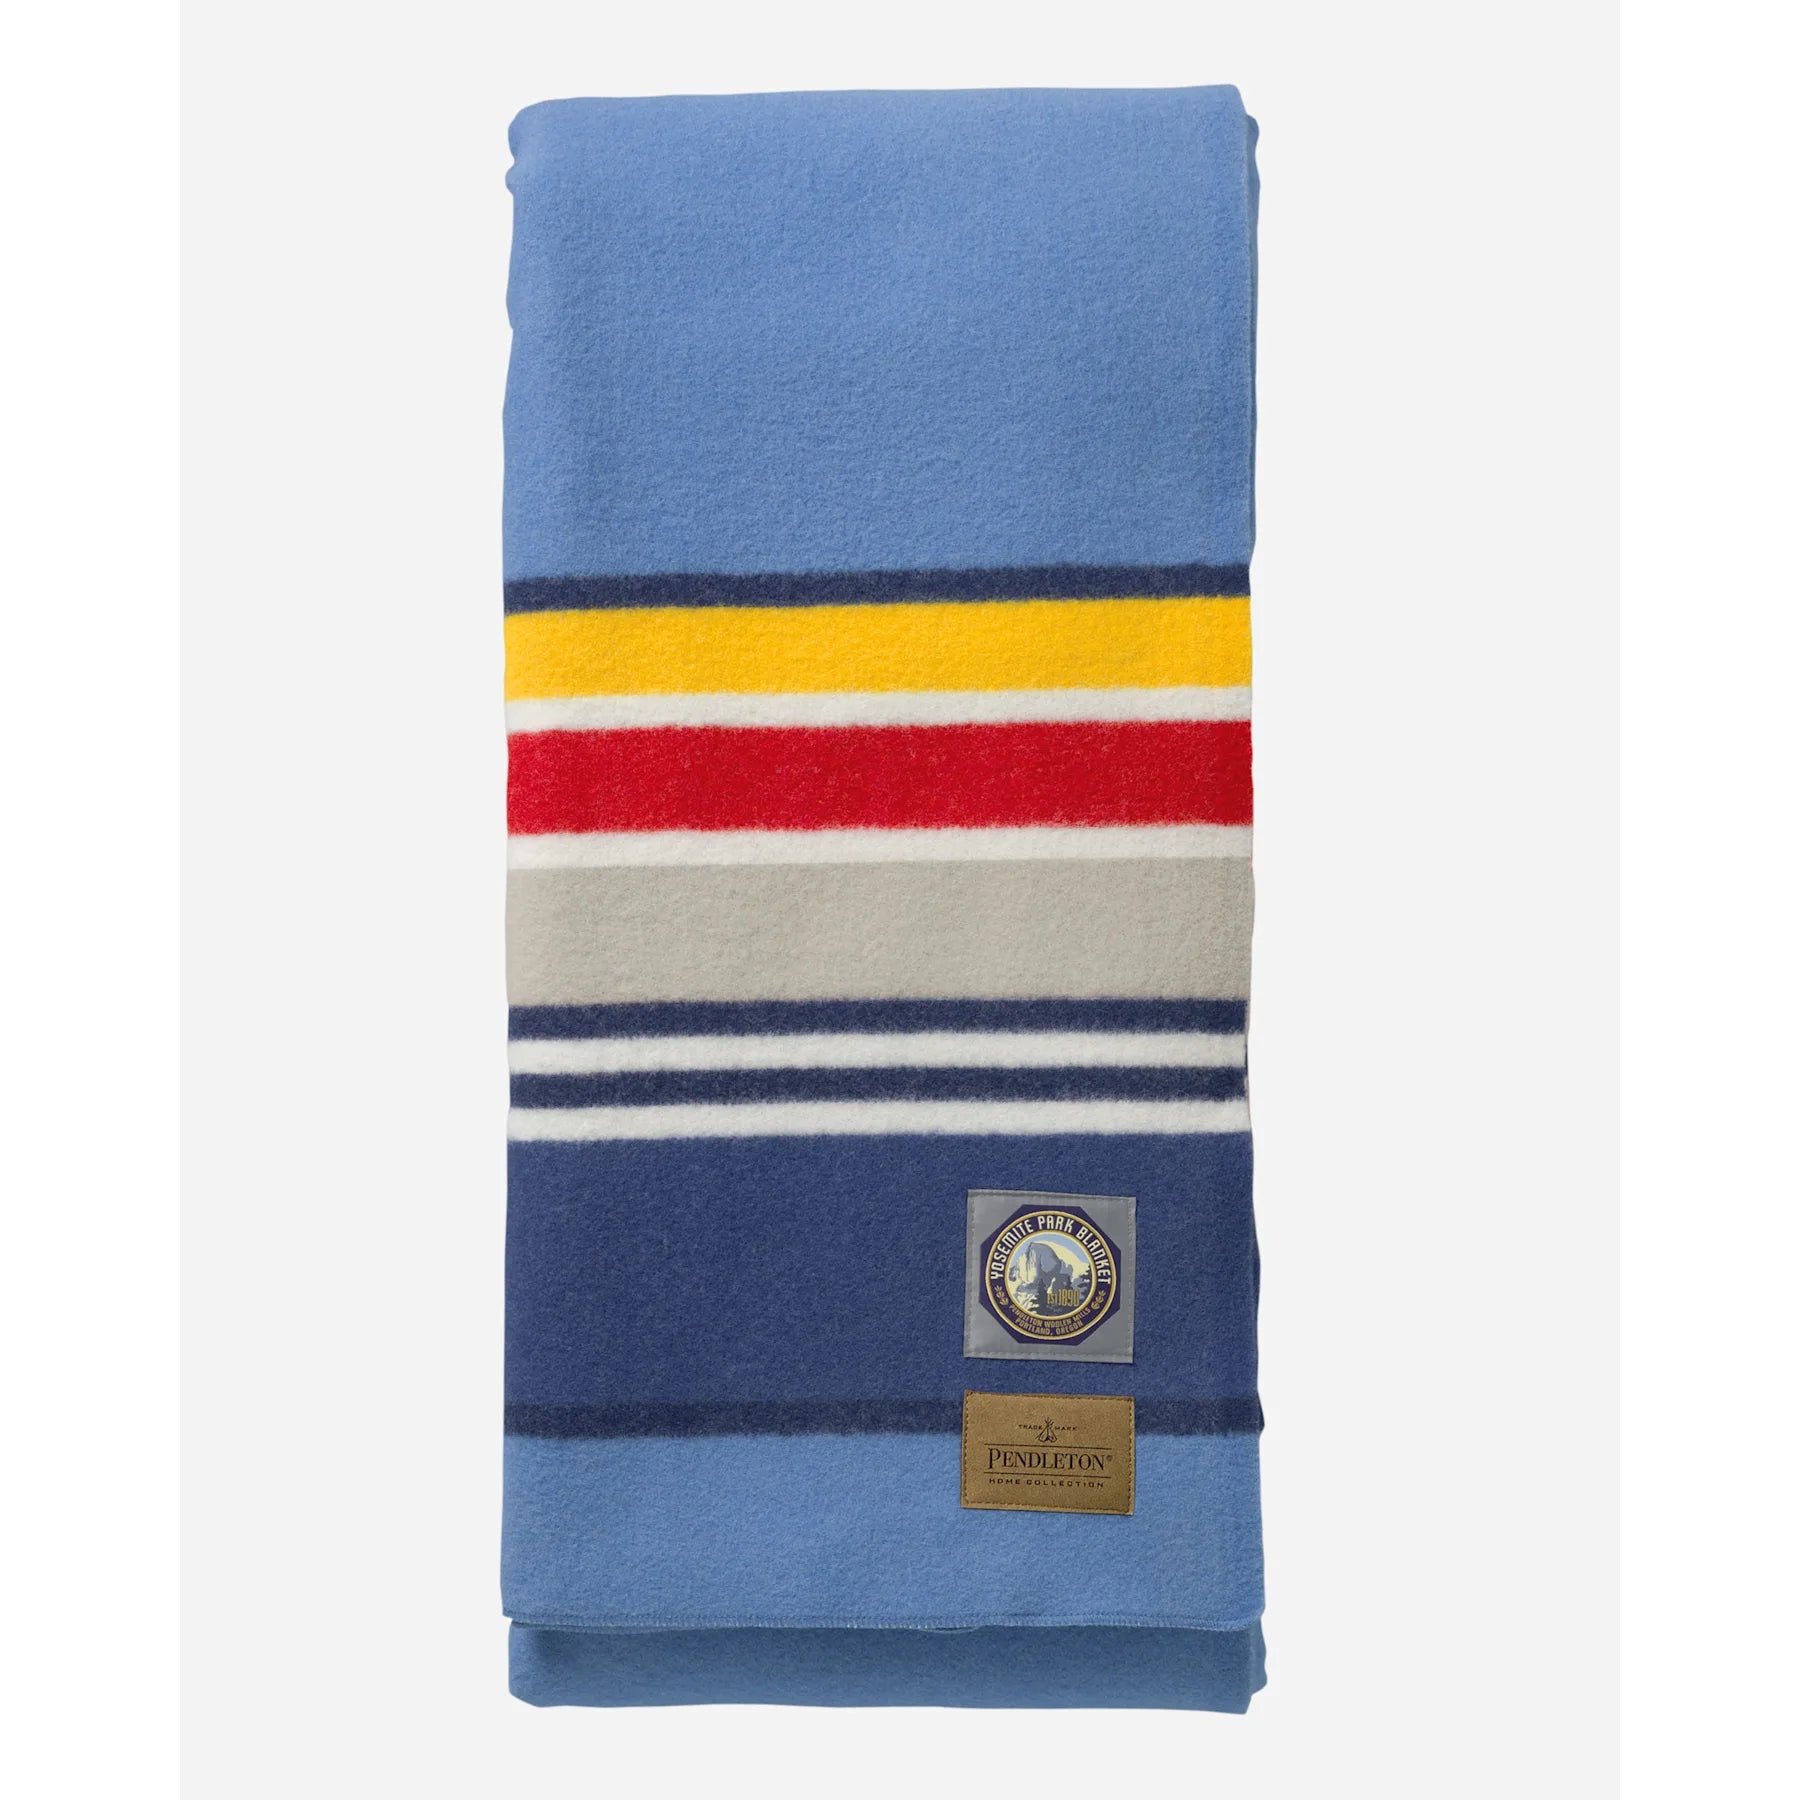 Pendleton Yosemite National Park blanket - light blue with yellow, red, gray and navy stripes on edge